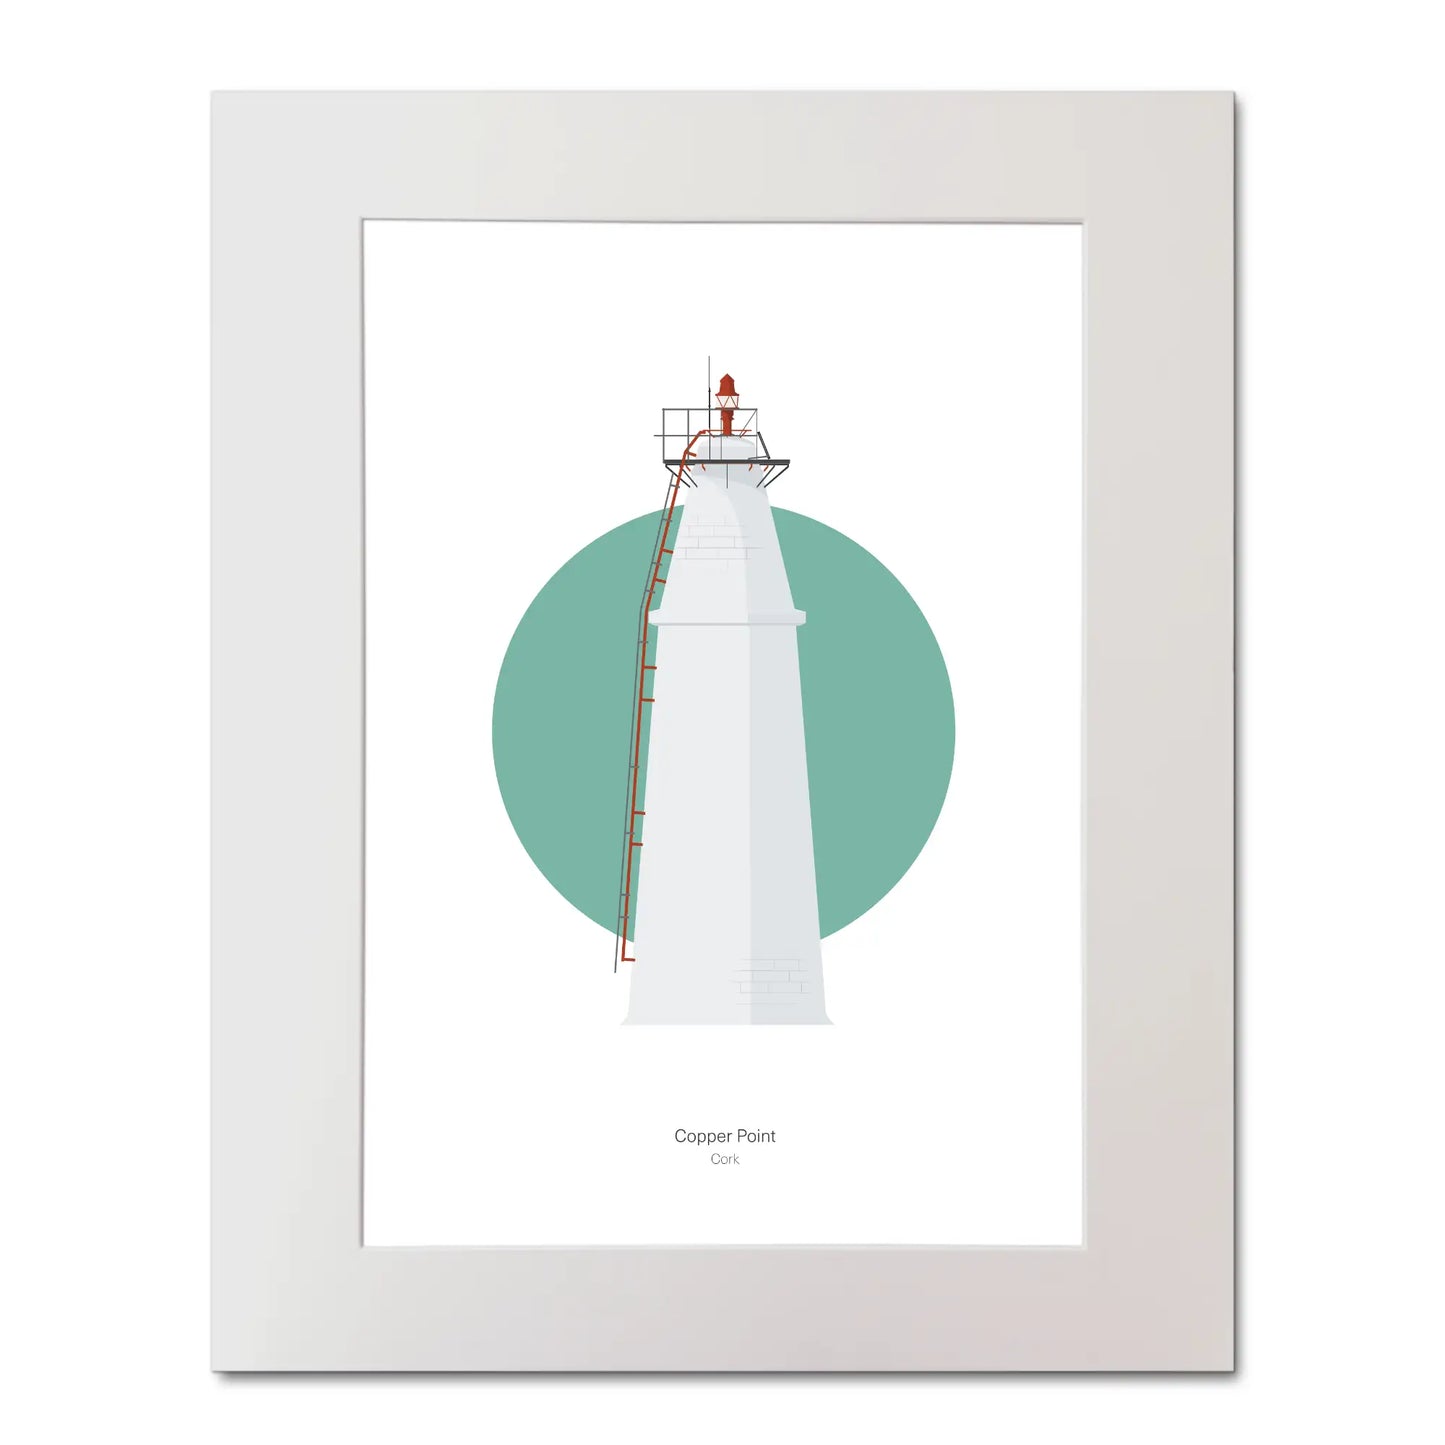 Contemporary illustration of Copper Point lighthouse on a white background inside light blue square, mounted and measuring 40x50cm.